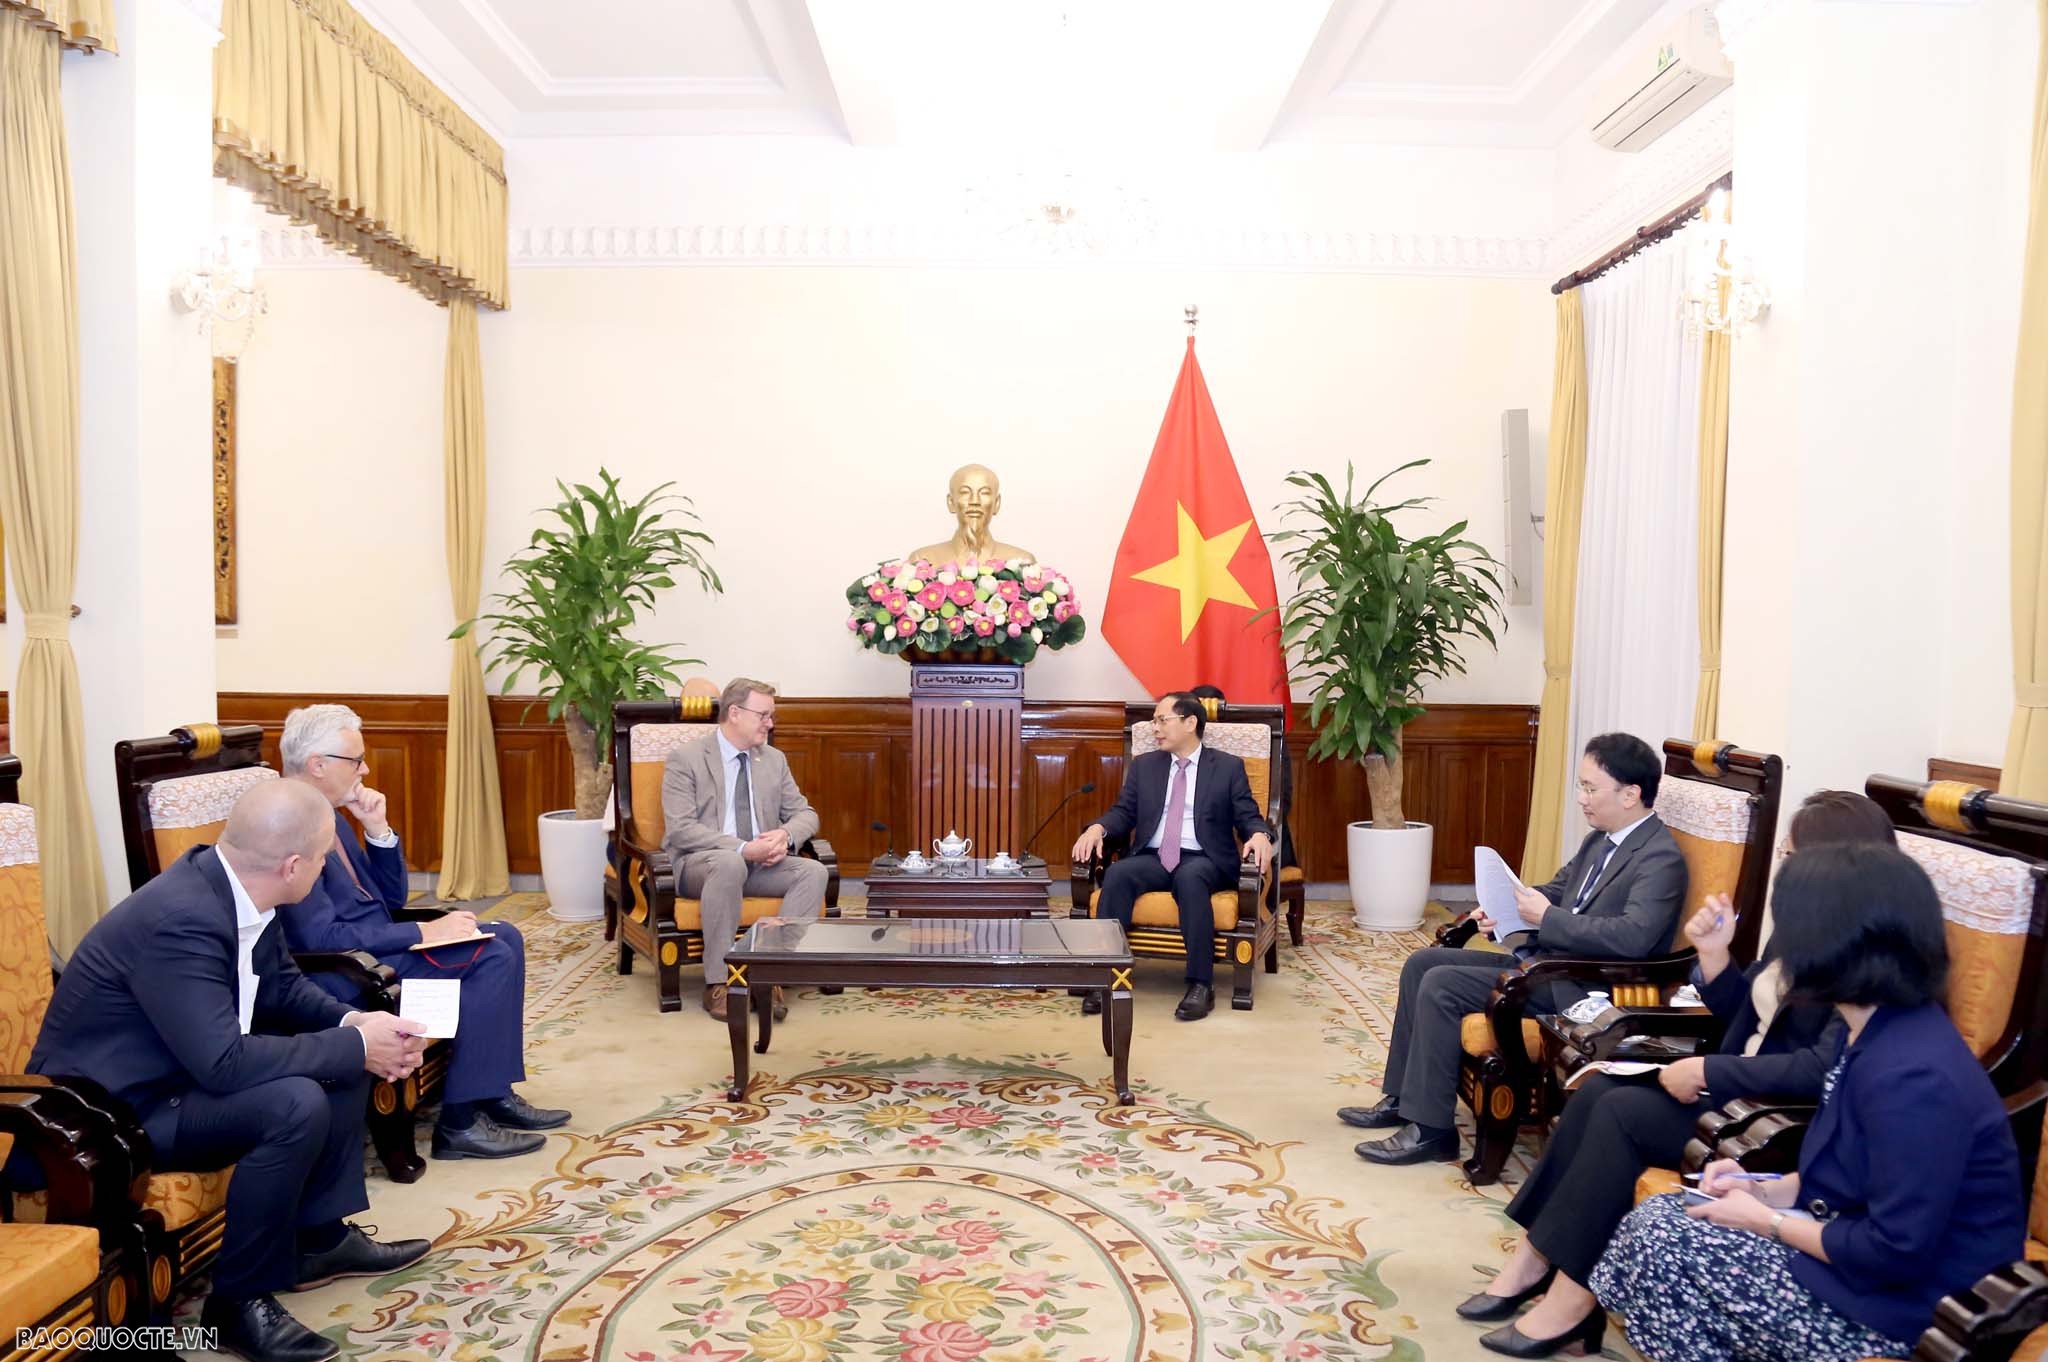 FM Bui Thanh Son receives Minister-President of German Federal State of Thüringen